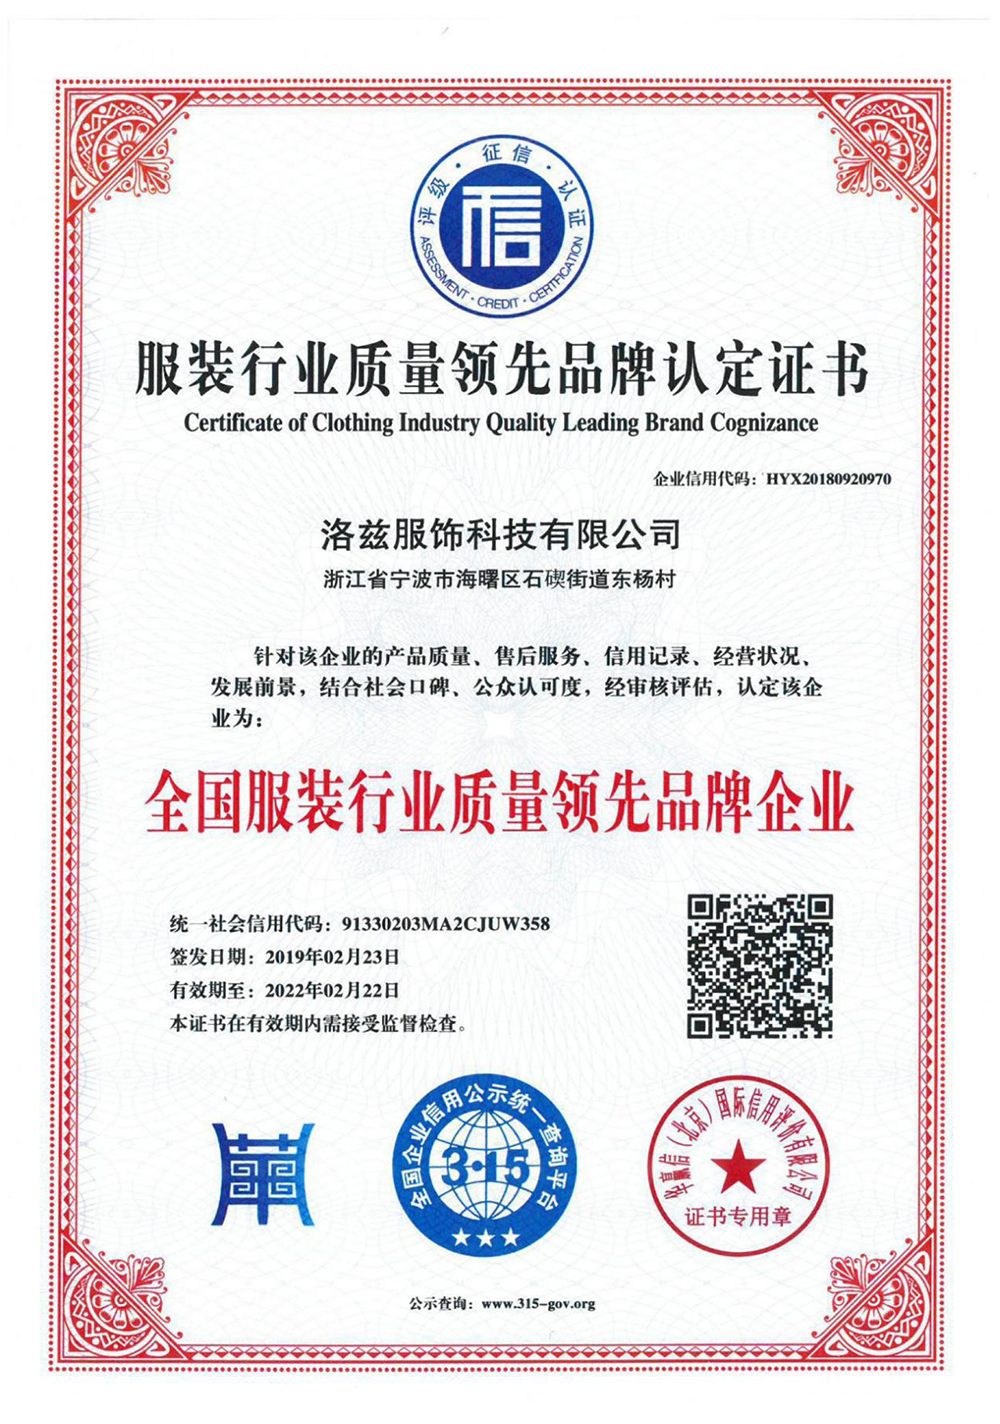 Certification of leading brand in garment industry